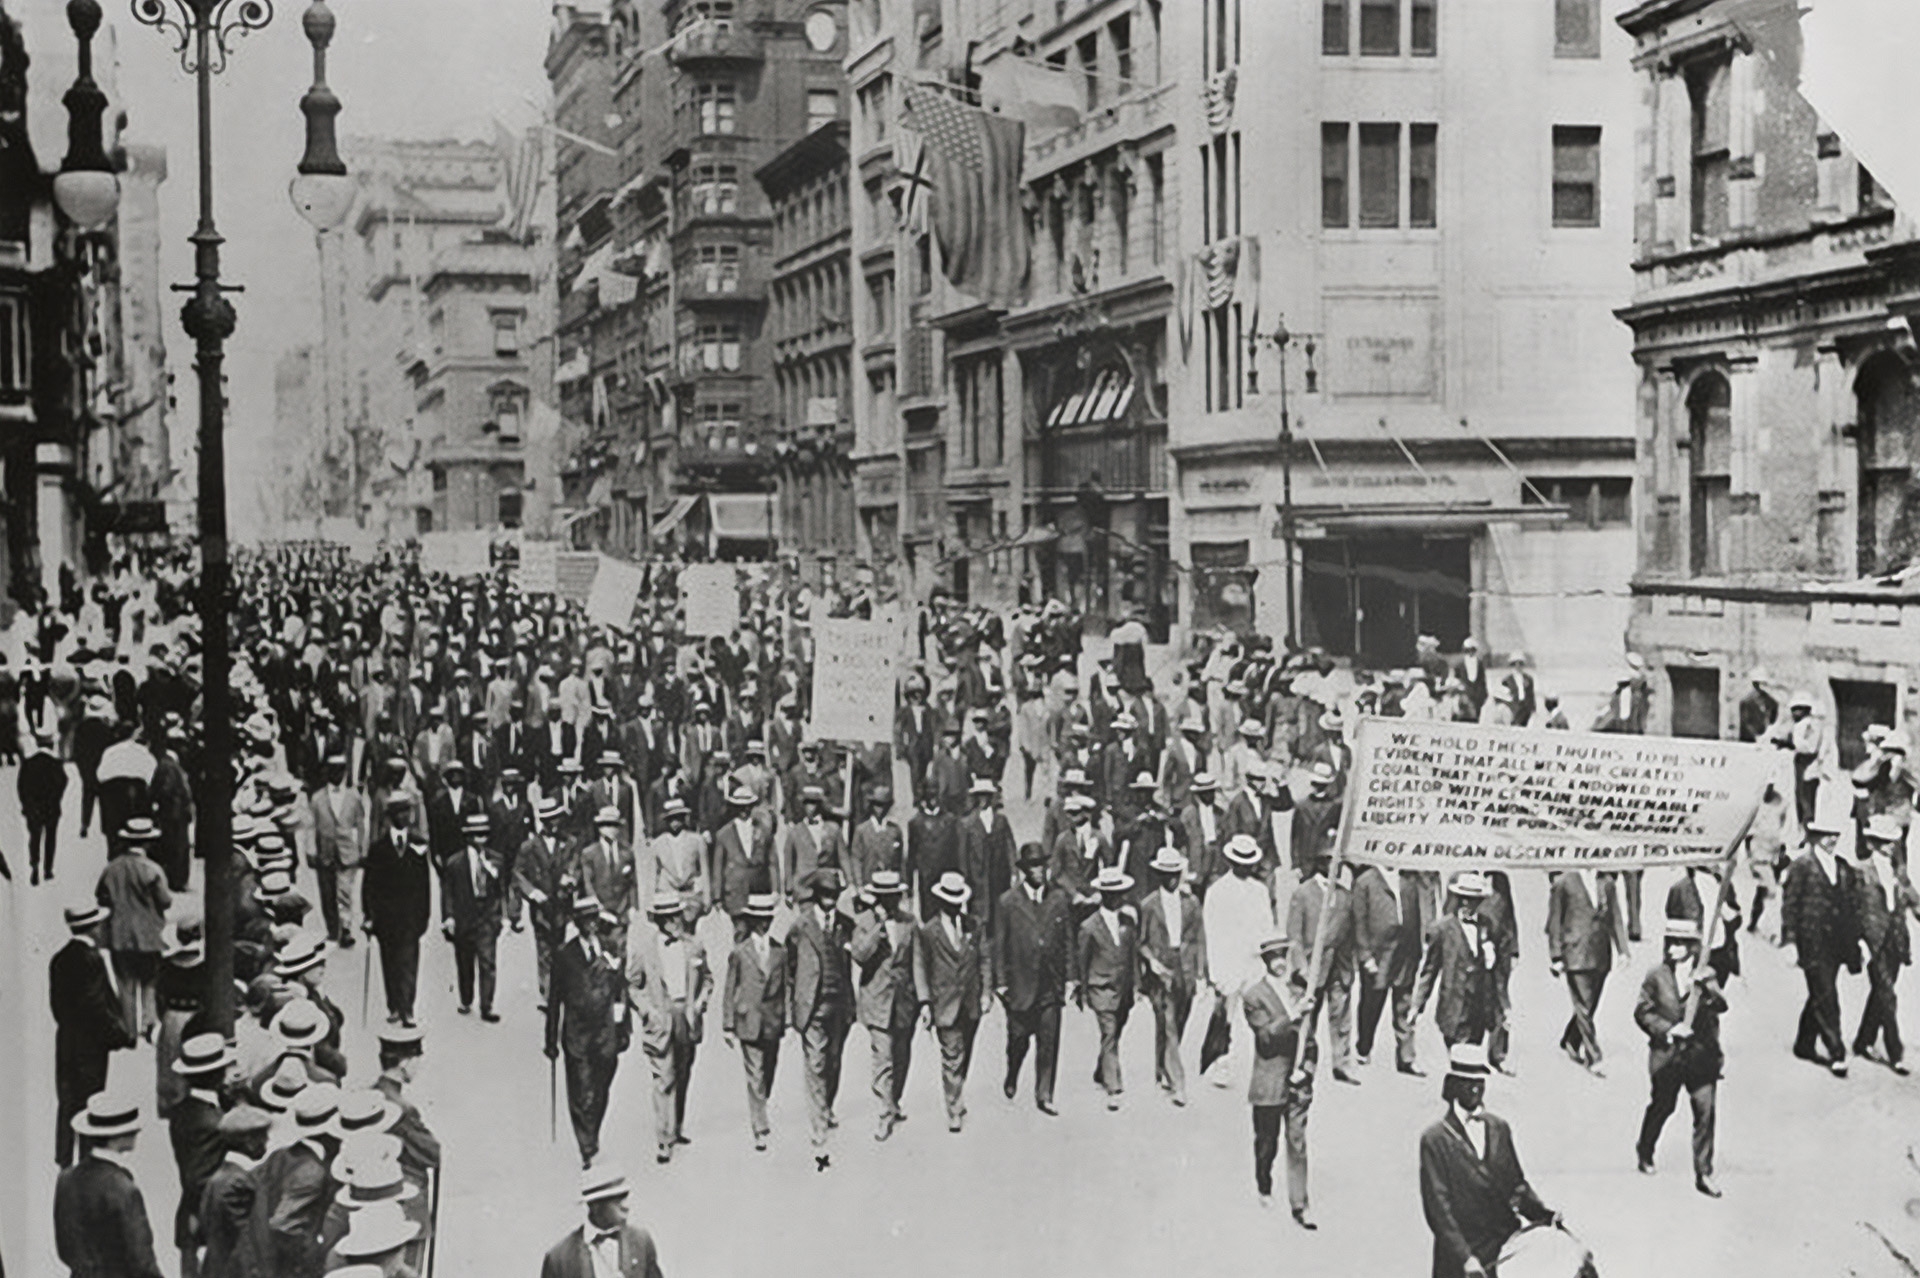 On July 28, 1917, several thousand Black men, women, and children silently walked down Fifth Avenue in New York City in protest of lynchings and the recent East St. Louis riots. The Silent Parade was organized by the NAACP (National Association for the Advancement of Colored People) and increased the group’s visibility.